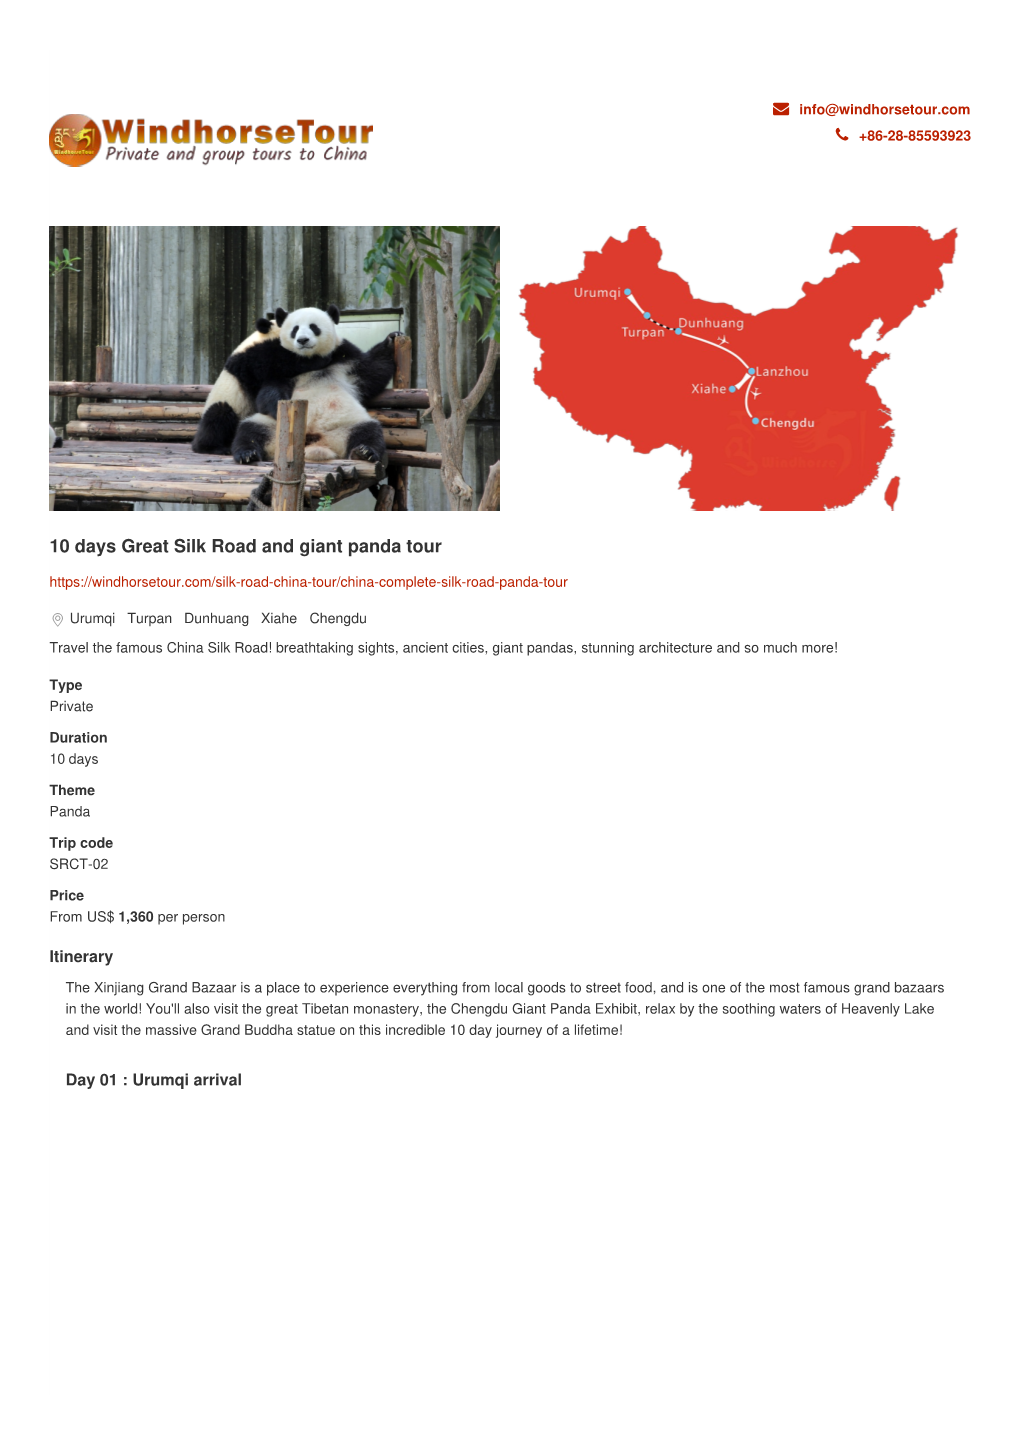 10 Days Great Silk Road and Giant Panda Tour